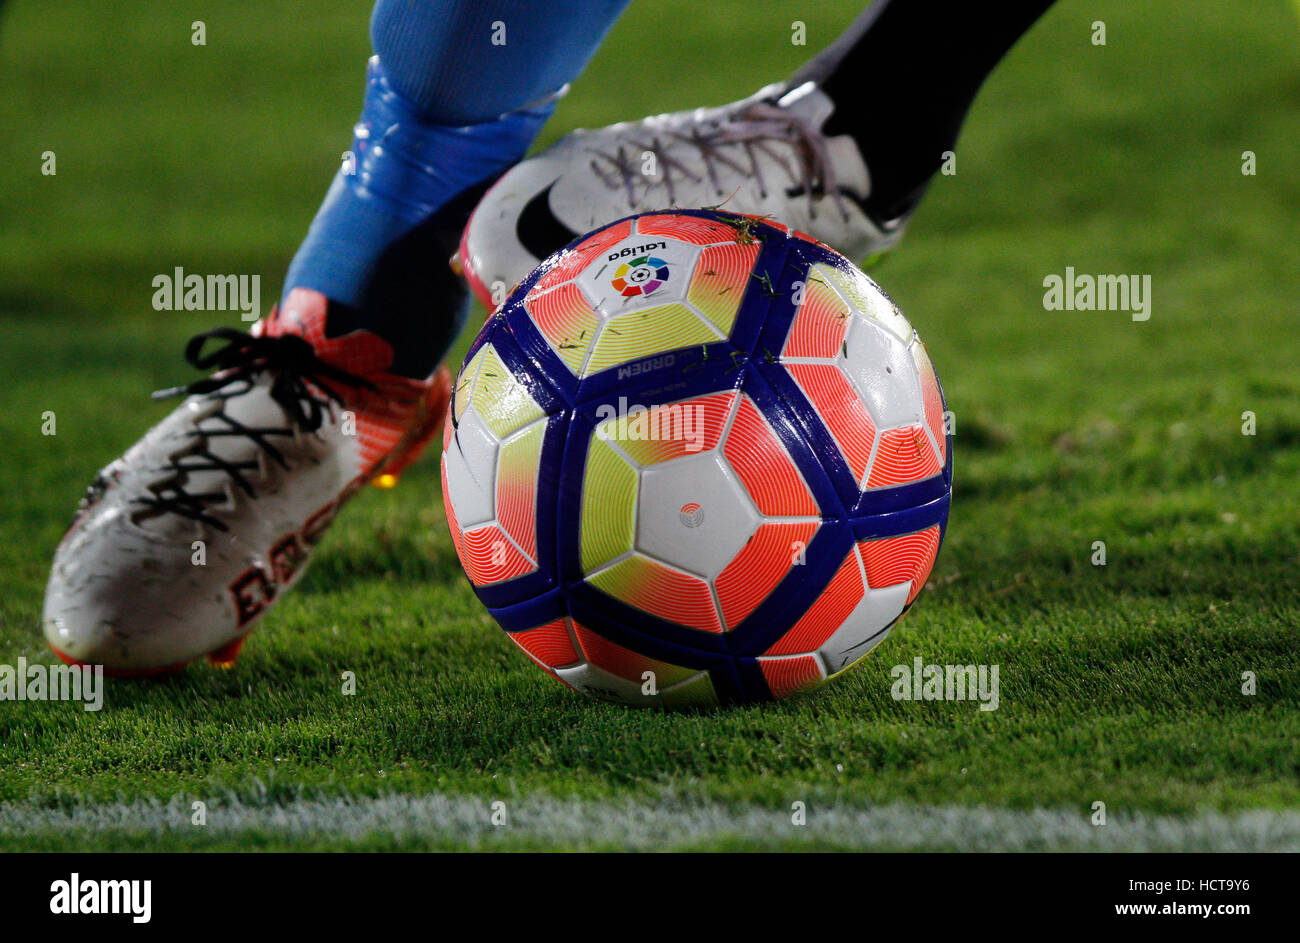 Detail of the feet of a soccer player running with the ball Stock Photo